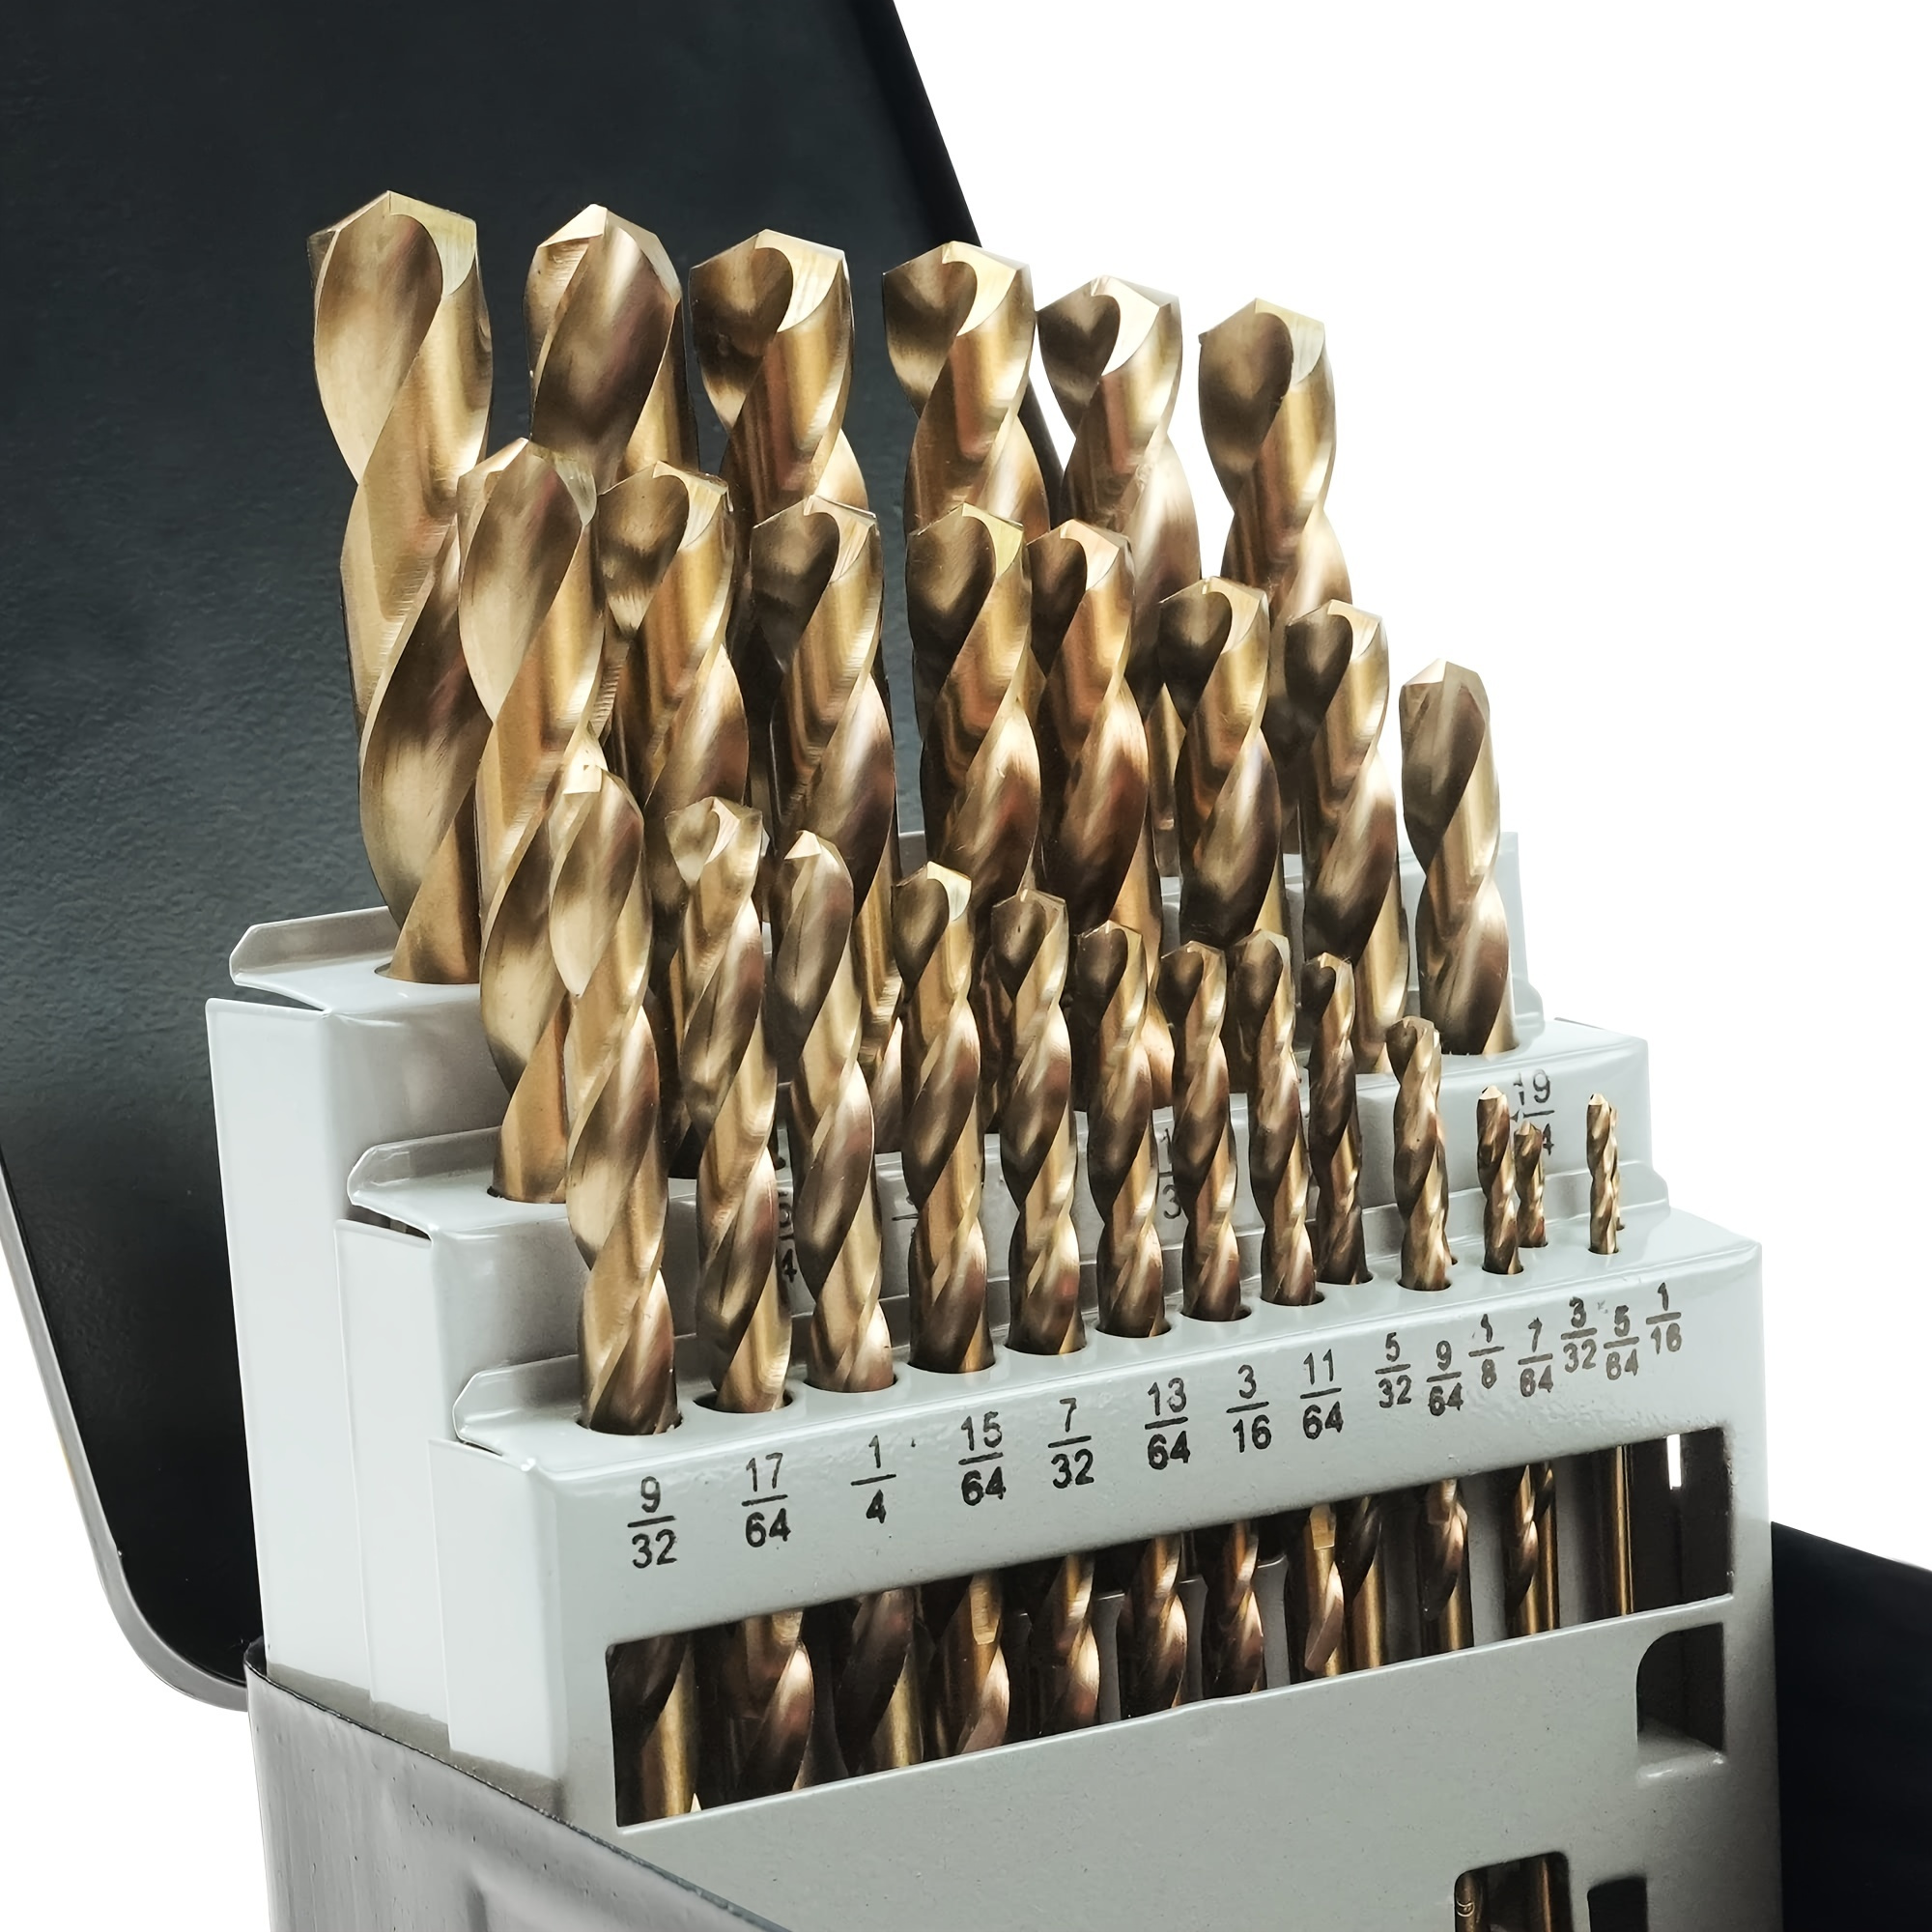 TiAlN Coated Hex Shank Cobalt HSS Four-stage Drill Bits